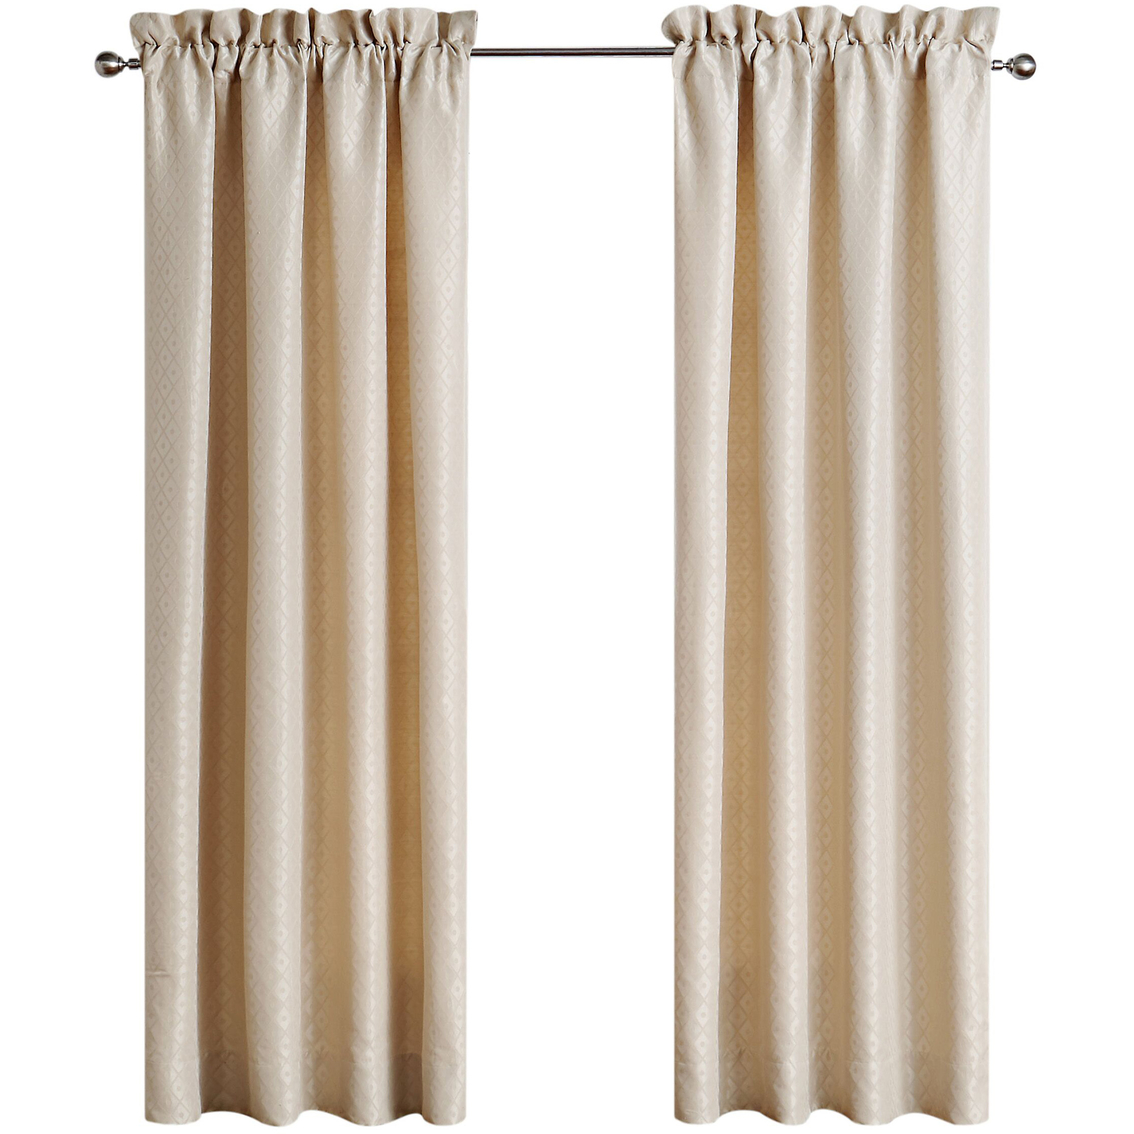 Waterford Anora Curtain Panels 2 pc. Set